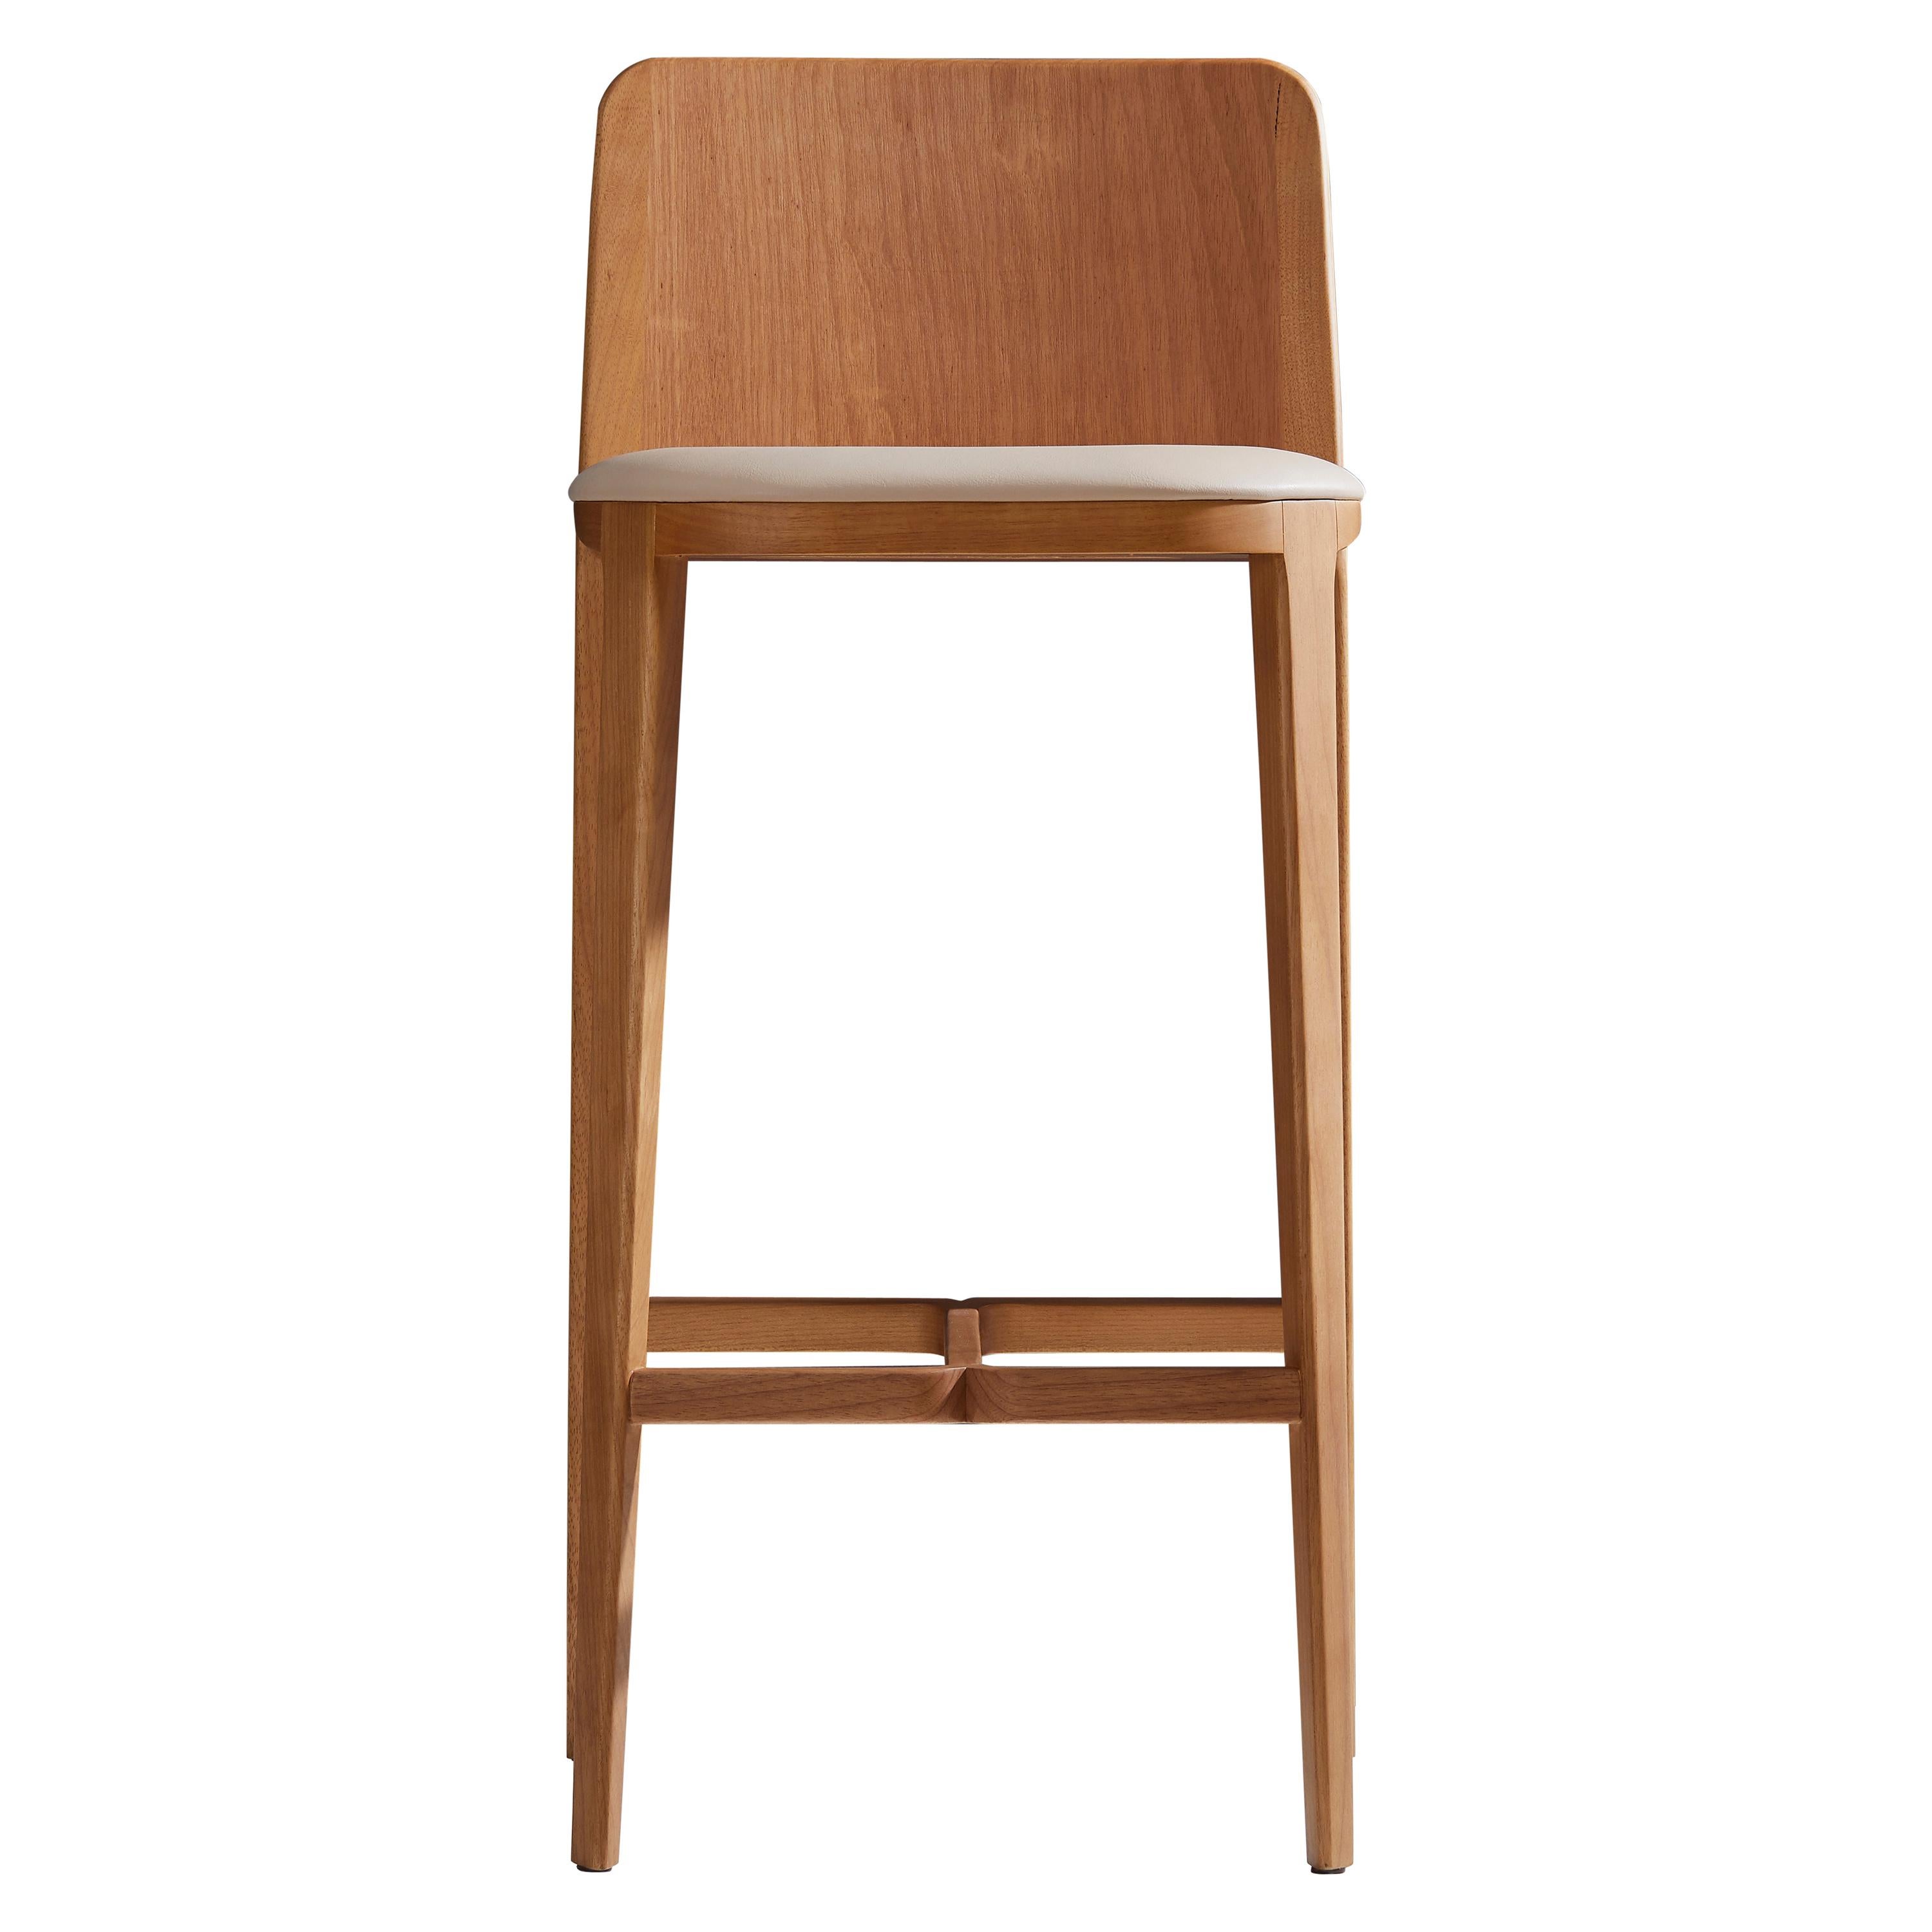 Minimal Style, Bar Stool in Solid Wood, Textiles or Leather Seatings